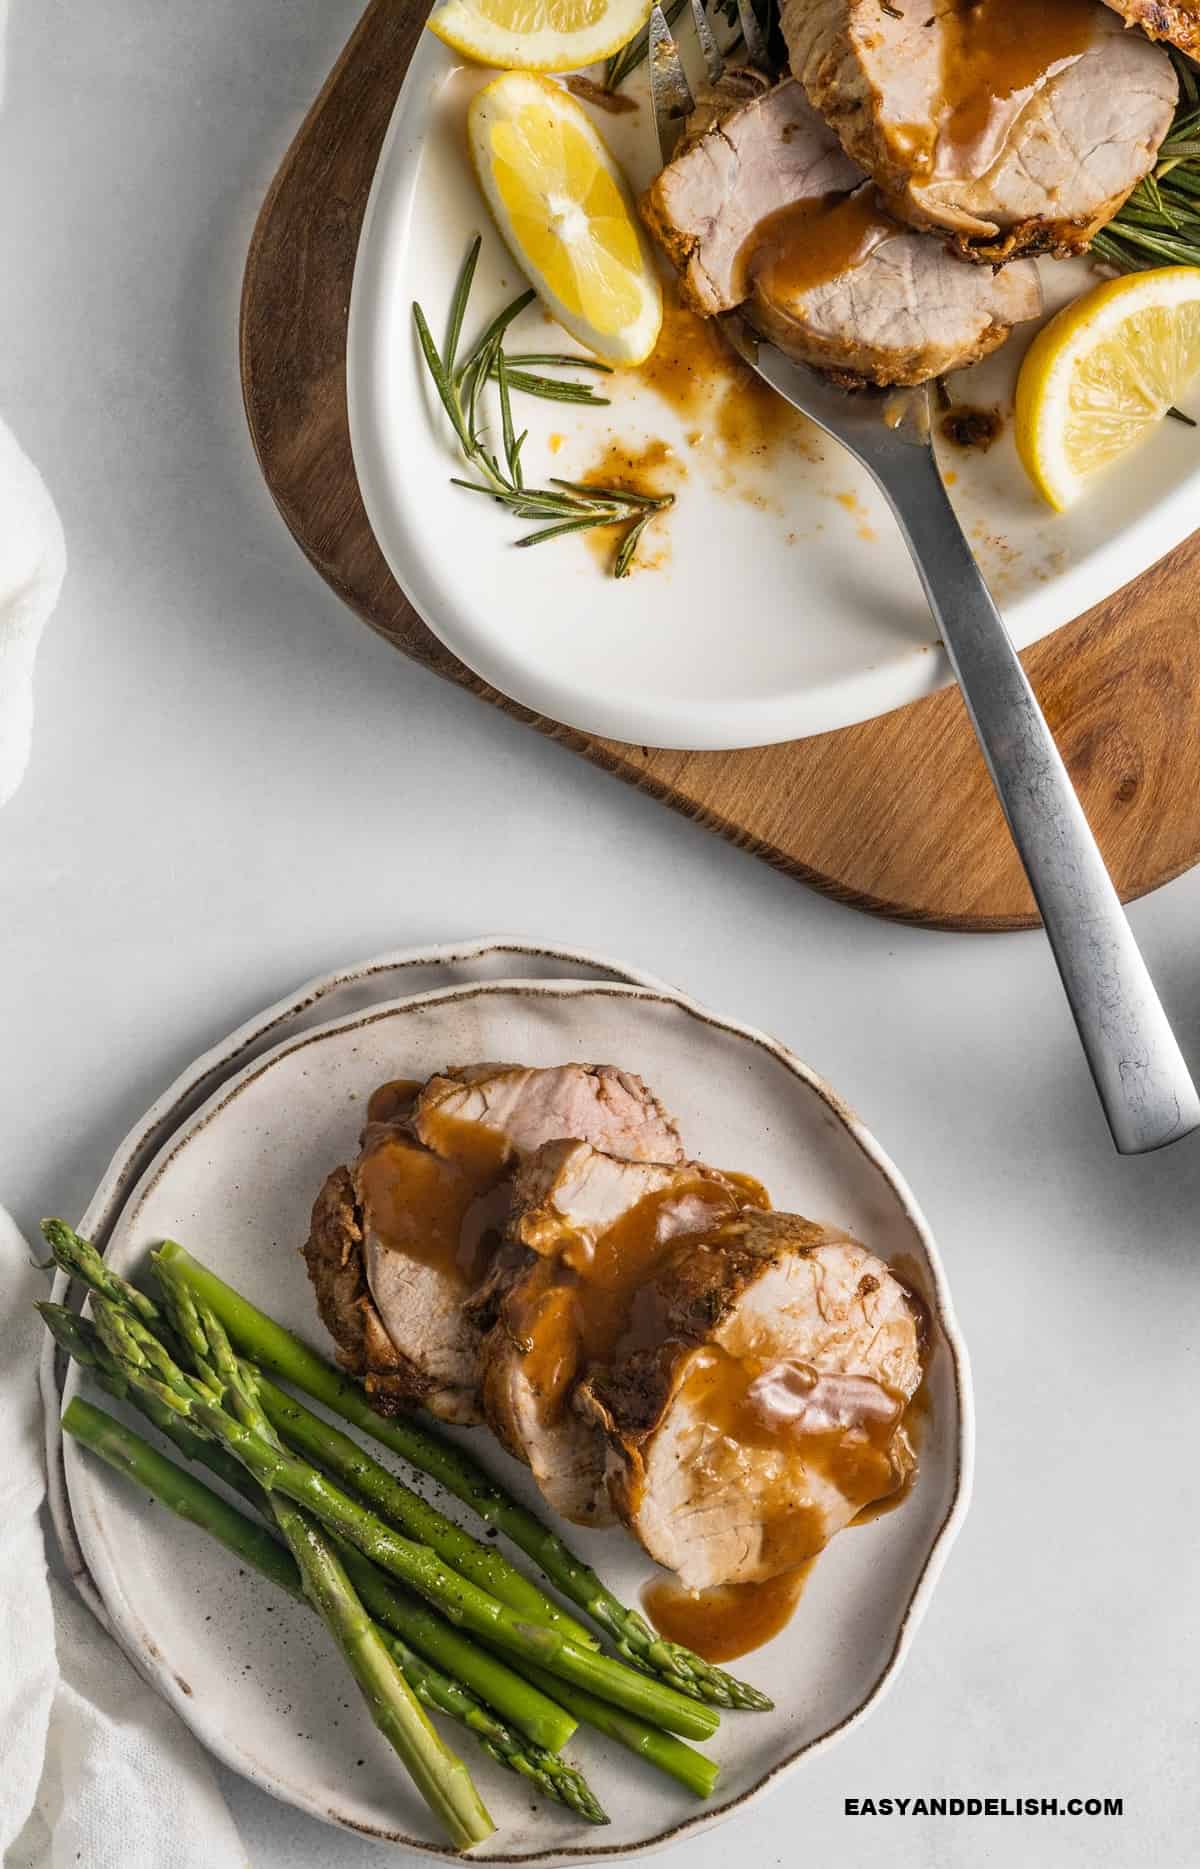 Sliced pork tenderloin with wine sauce served with asparagus and a platter in the background.